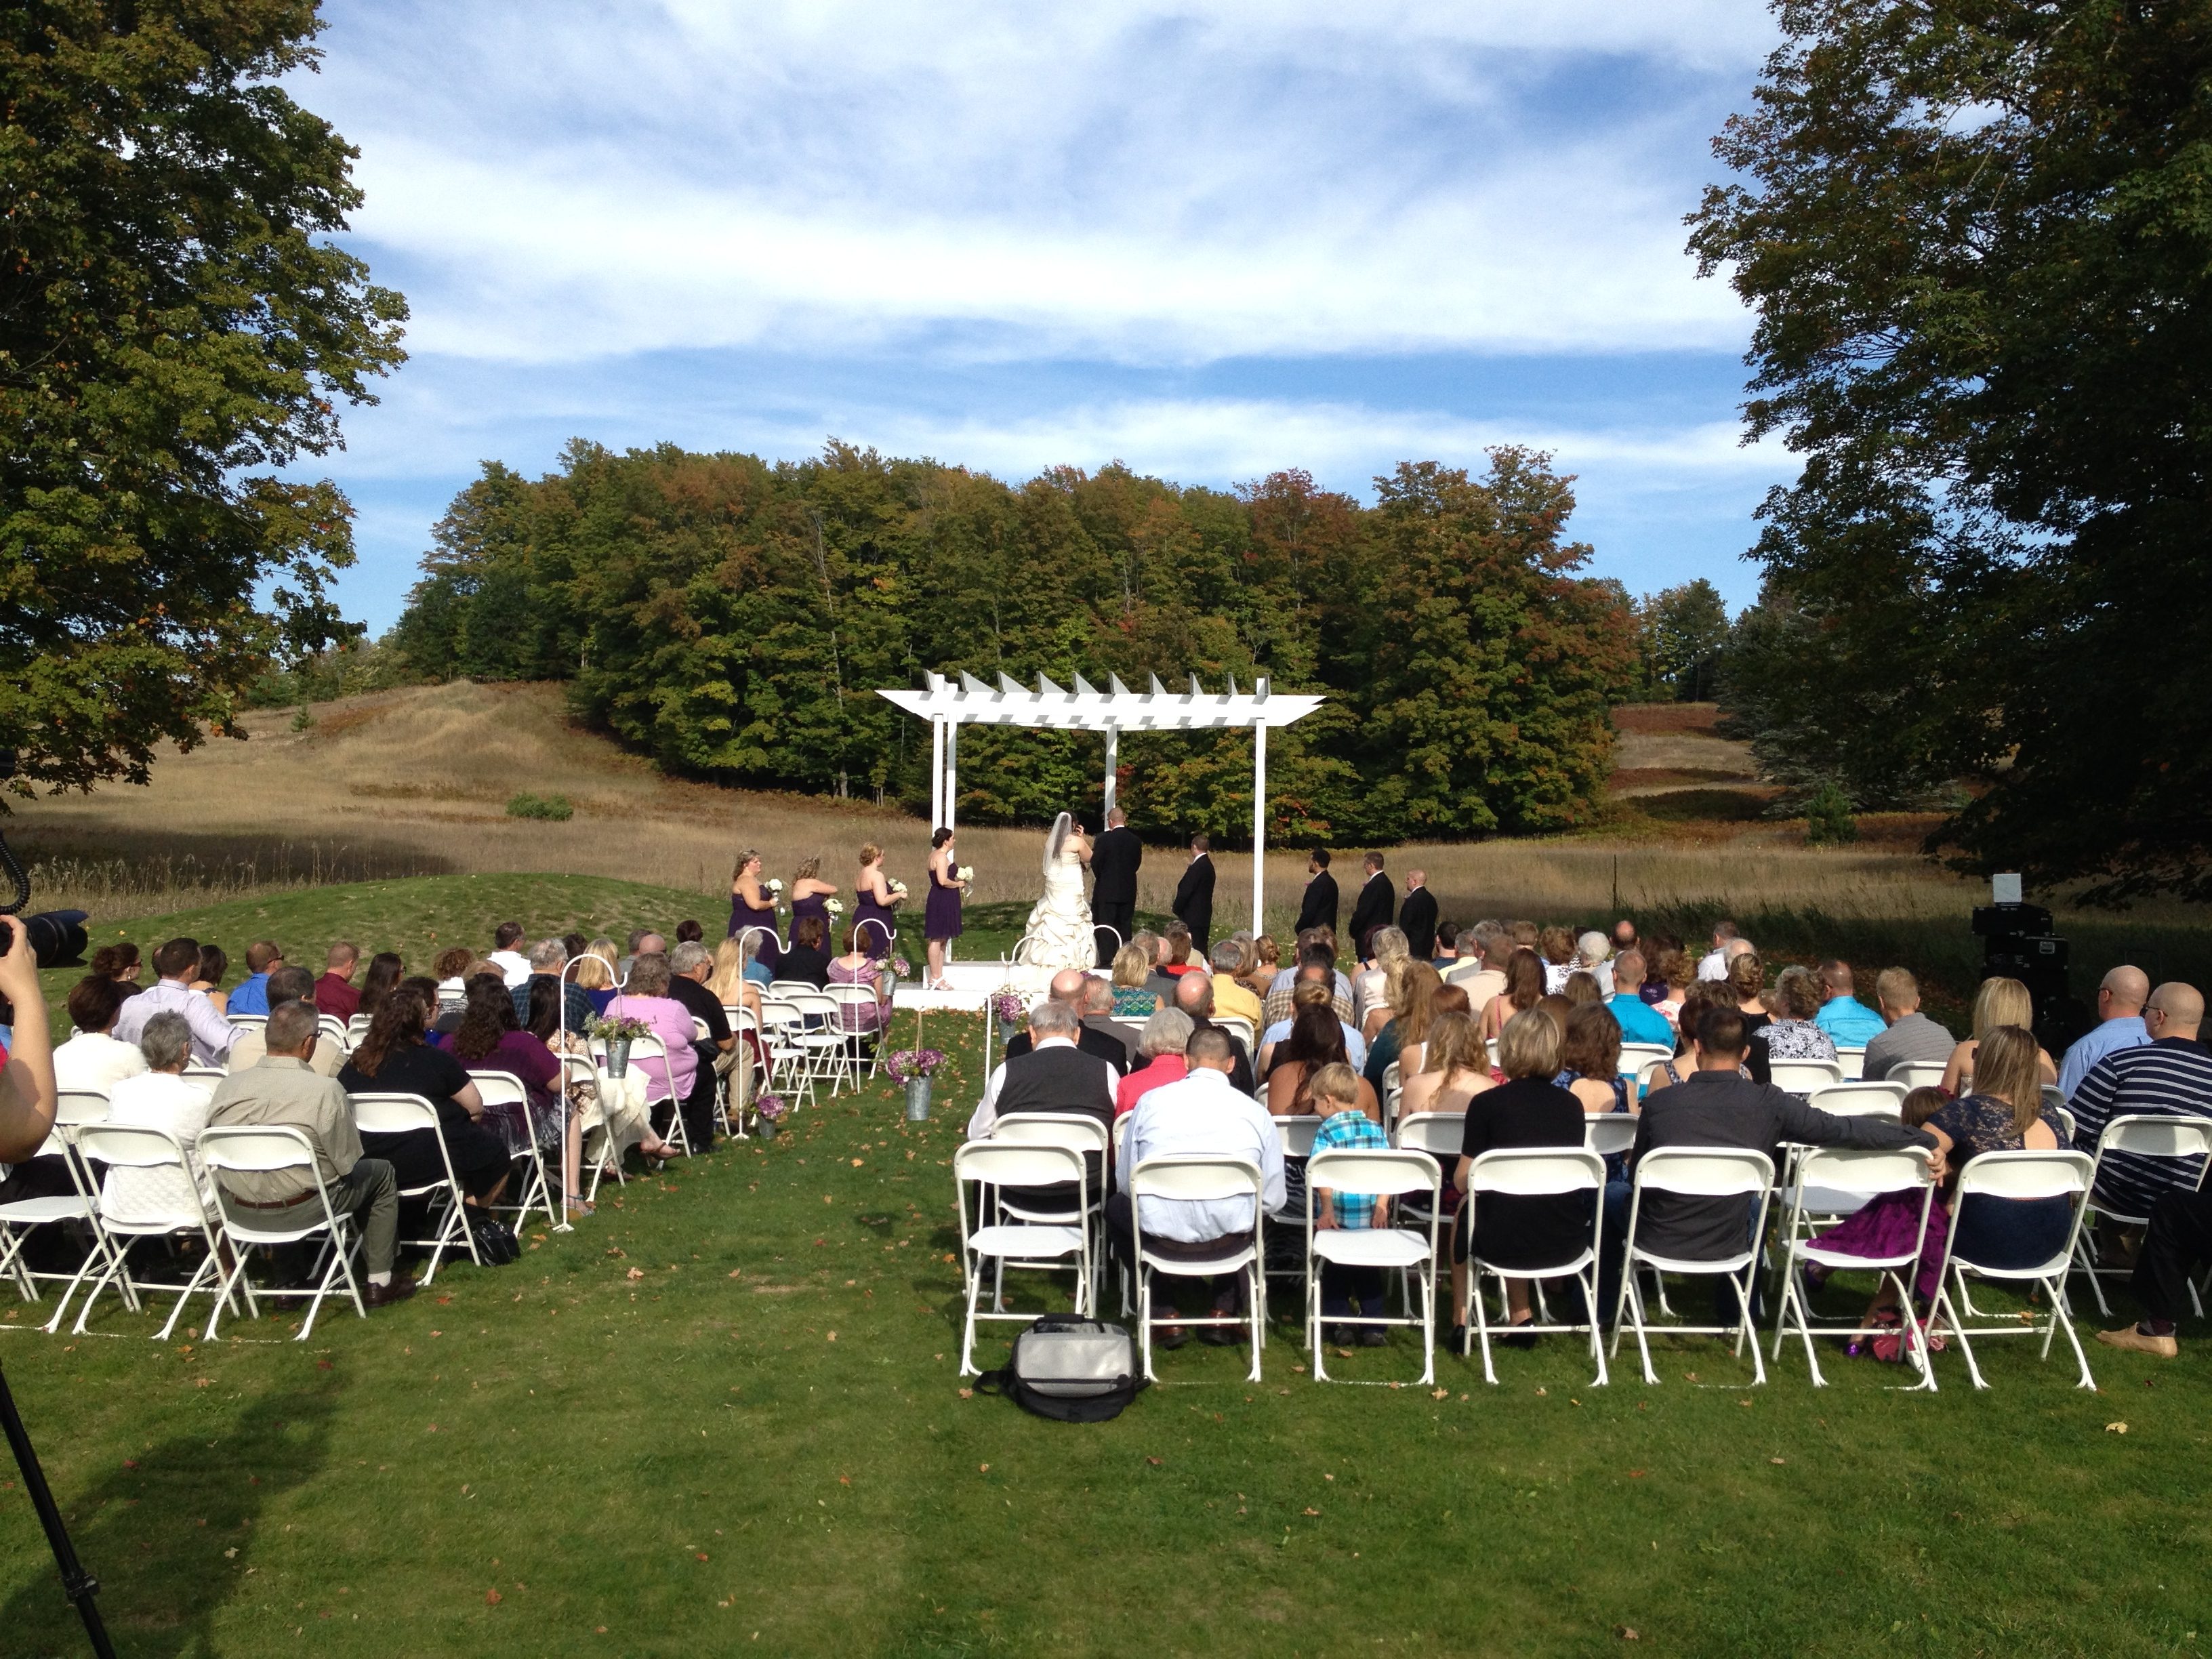 We also provide Ceremony Music/PA System